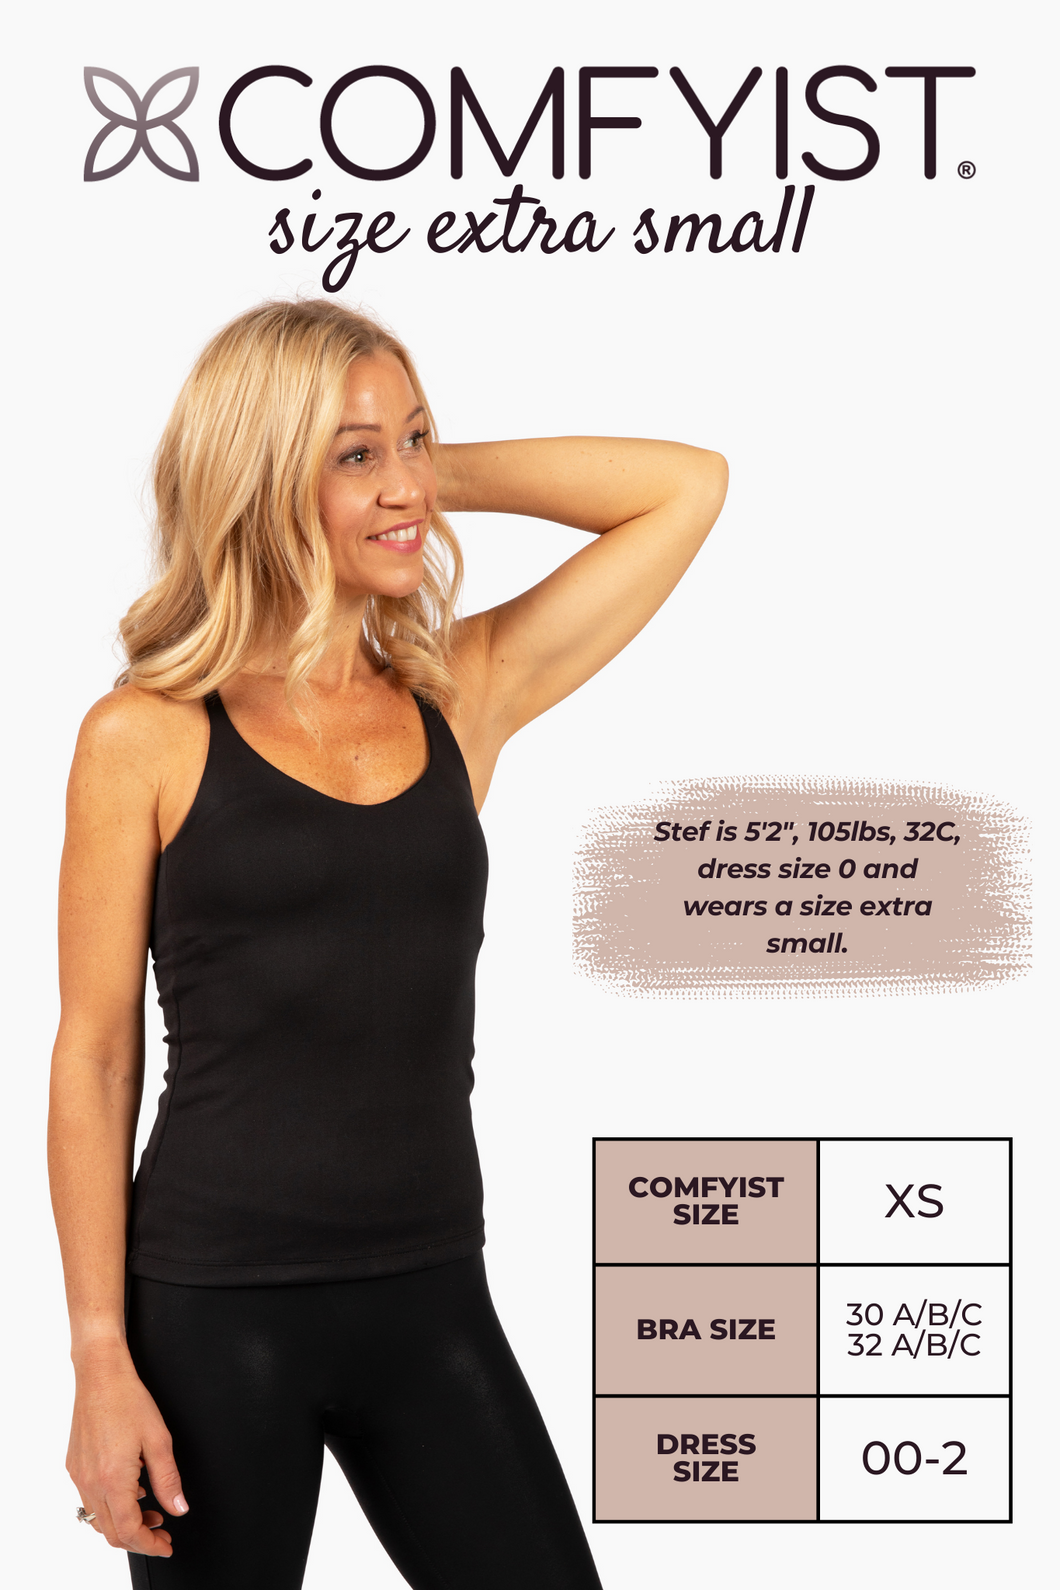 Size extra small model wearing Black COMFYIST camisole top with measurements and size chart - COMFYIST CAMI